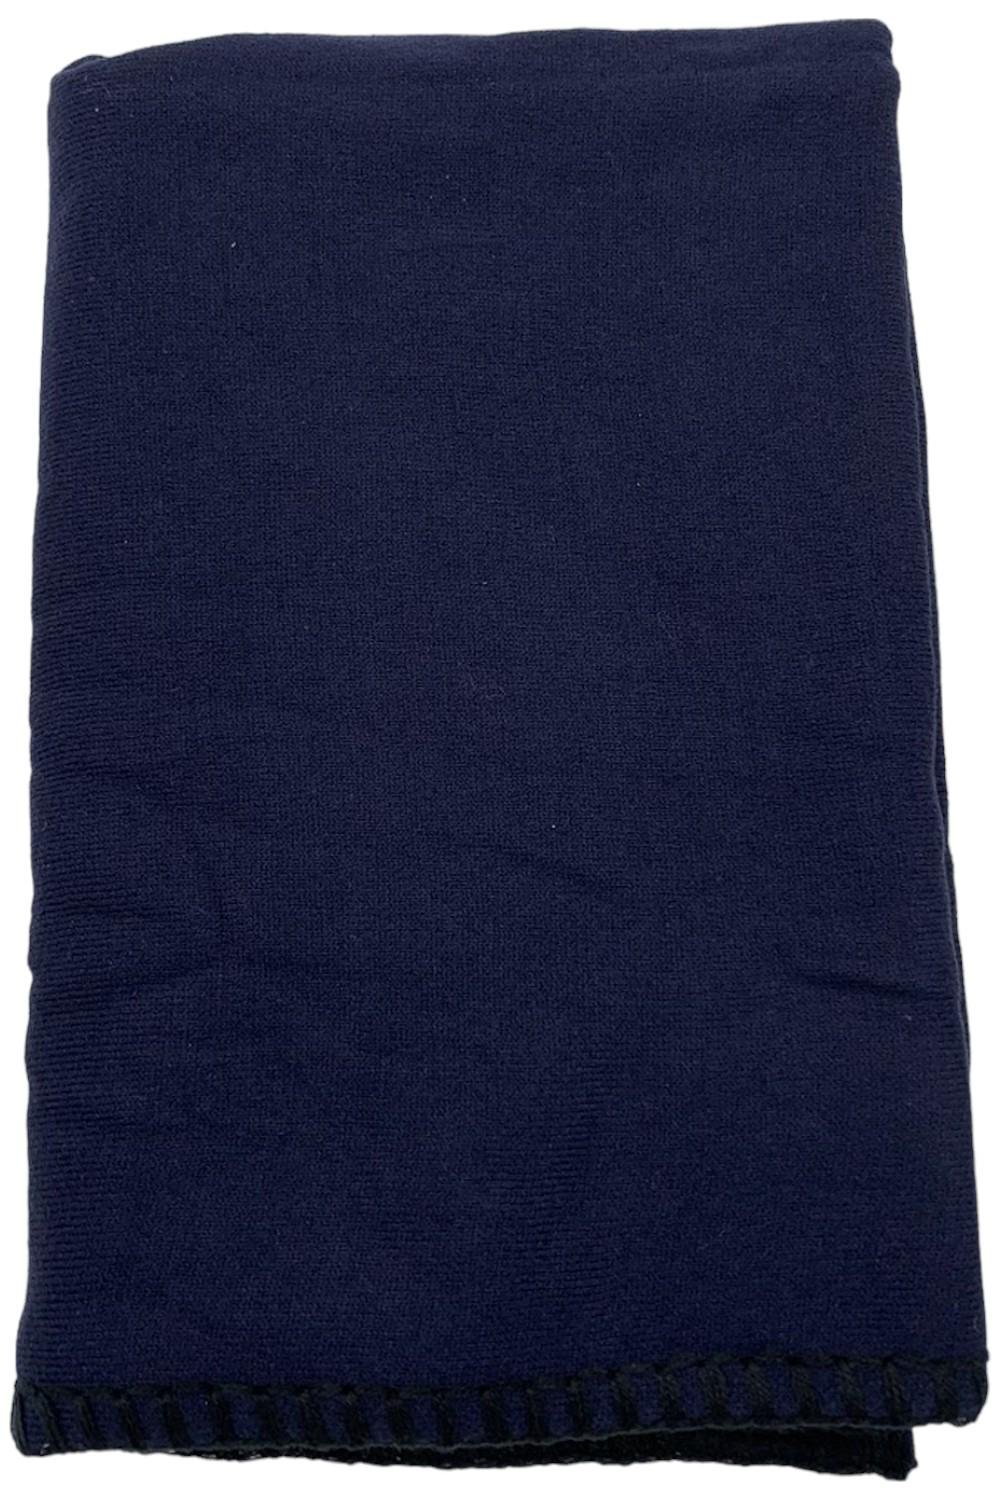 Patricia Nash Knit Scarf with Contrast Stitching Cobalt